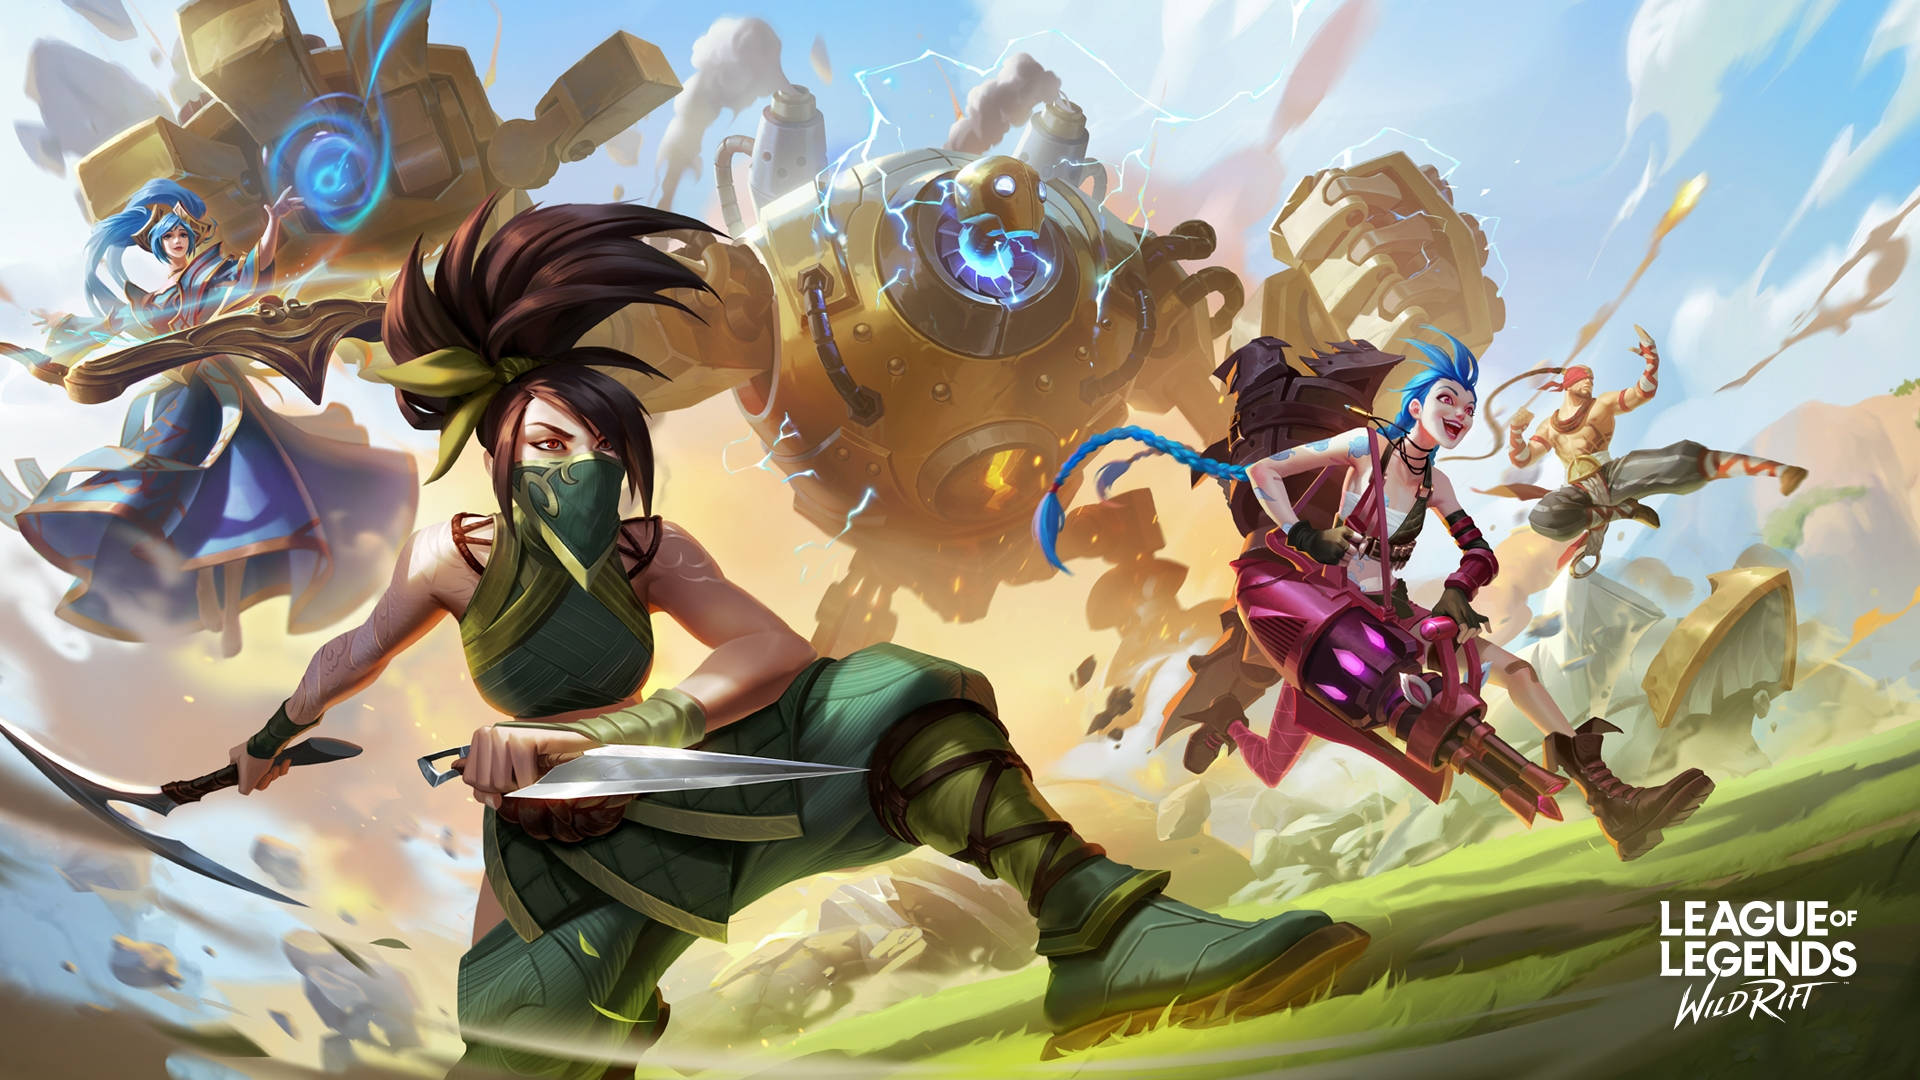 Summon Your Strength and Dive Into the Thrill of 3D League of Legends Wallpaper